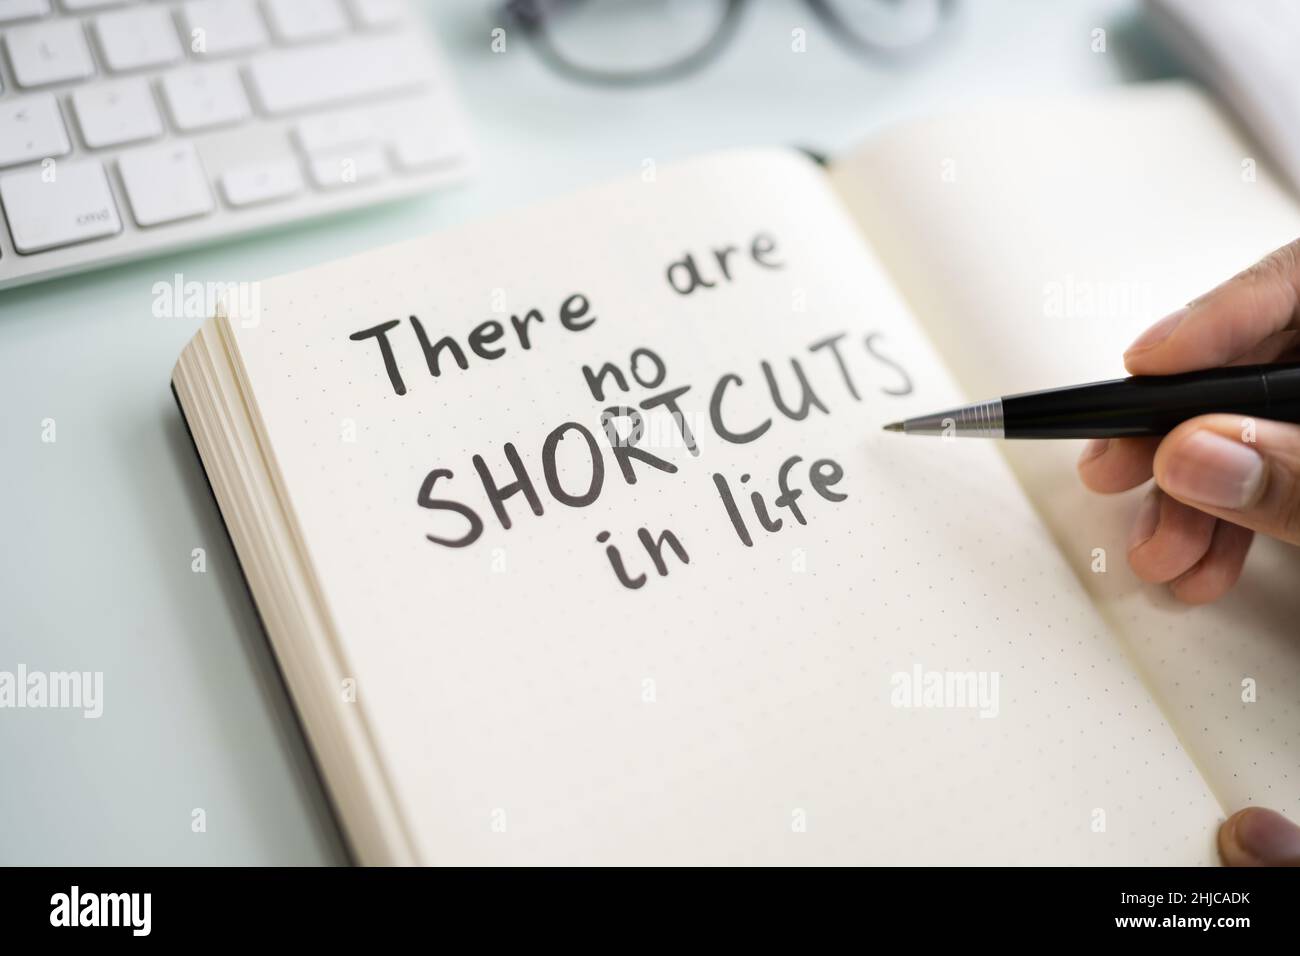 No Shortcut Text Written By Person With Marker On Page Stock Photo